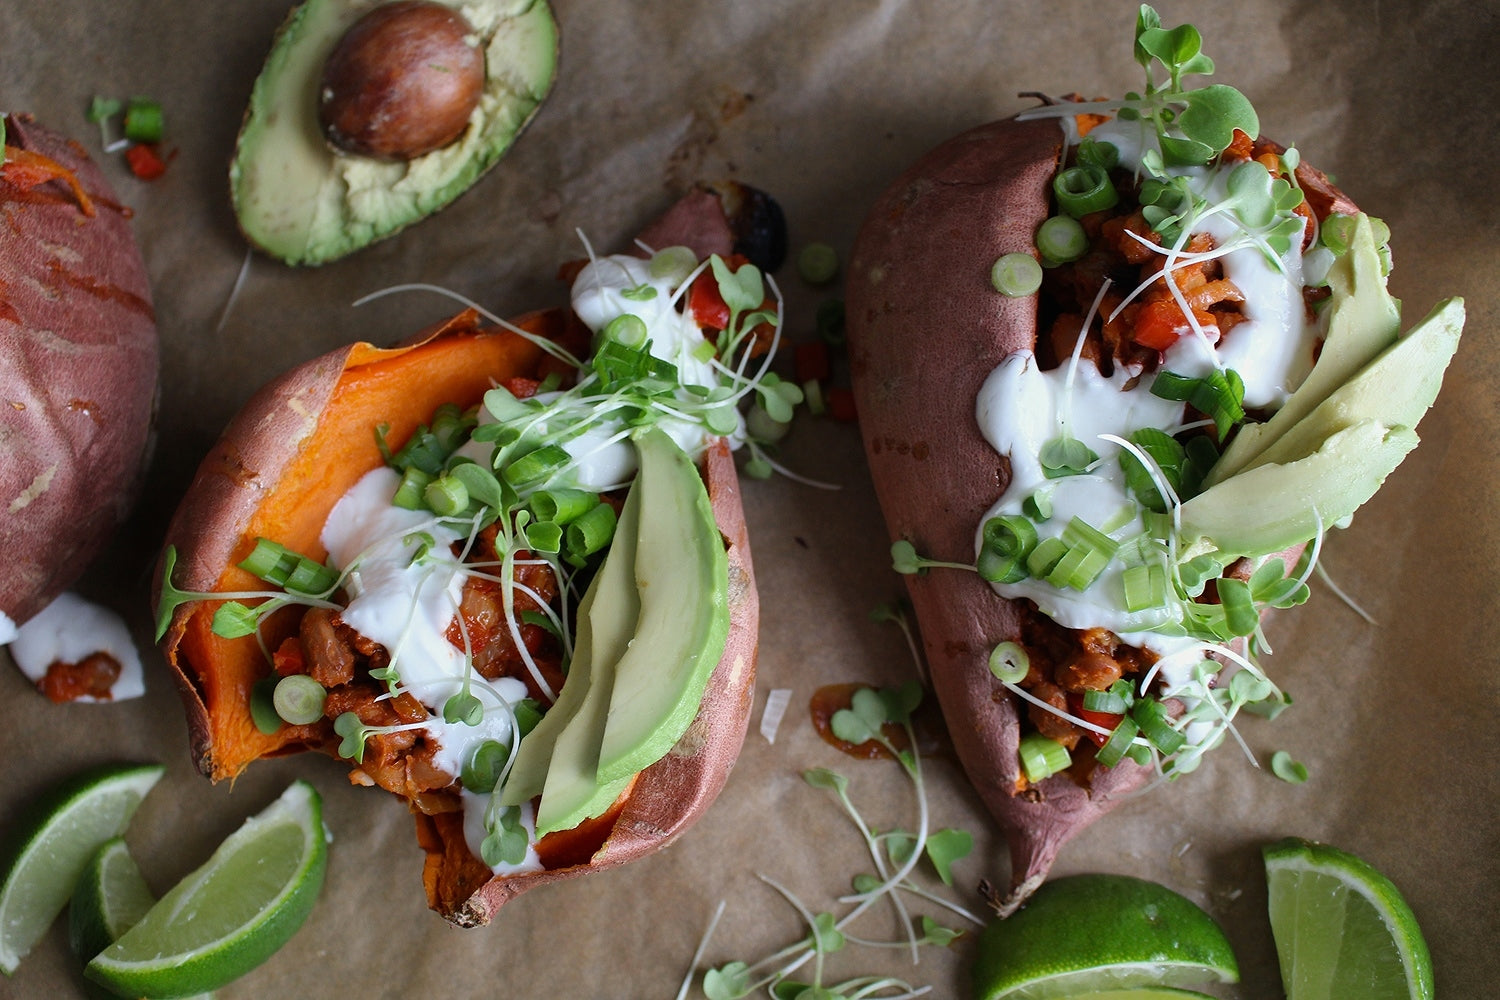 Stuffed sweet potatoes with sour cream, avocados, sprouts 